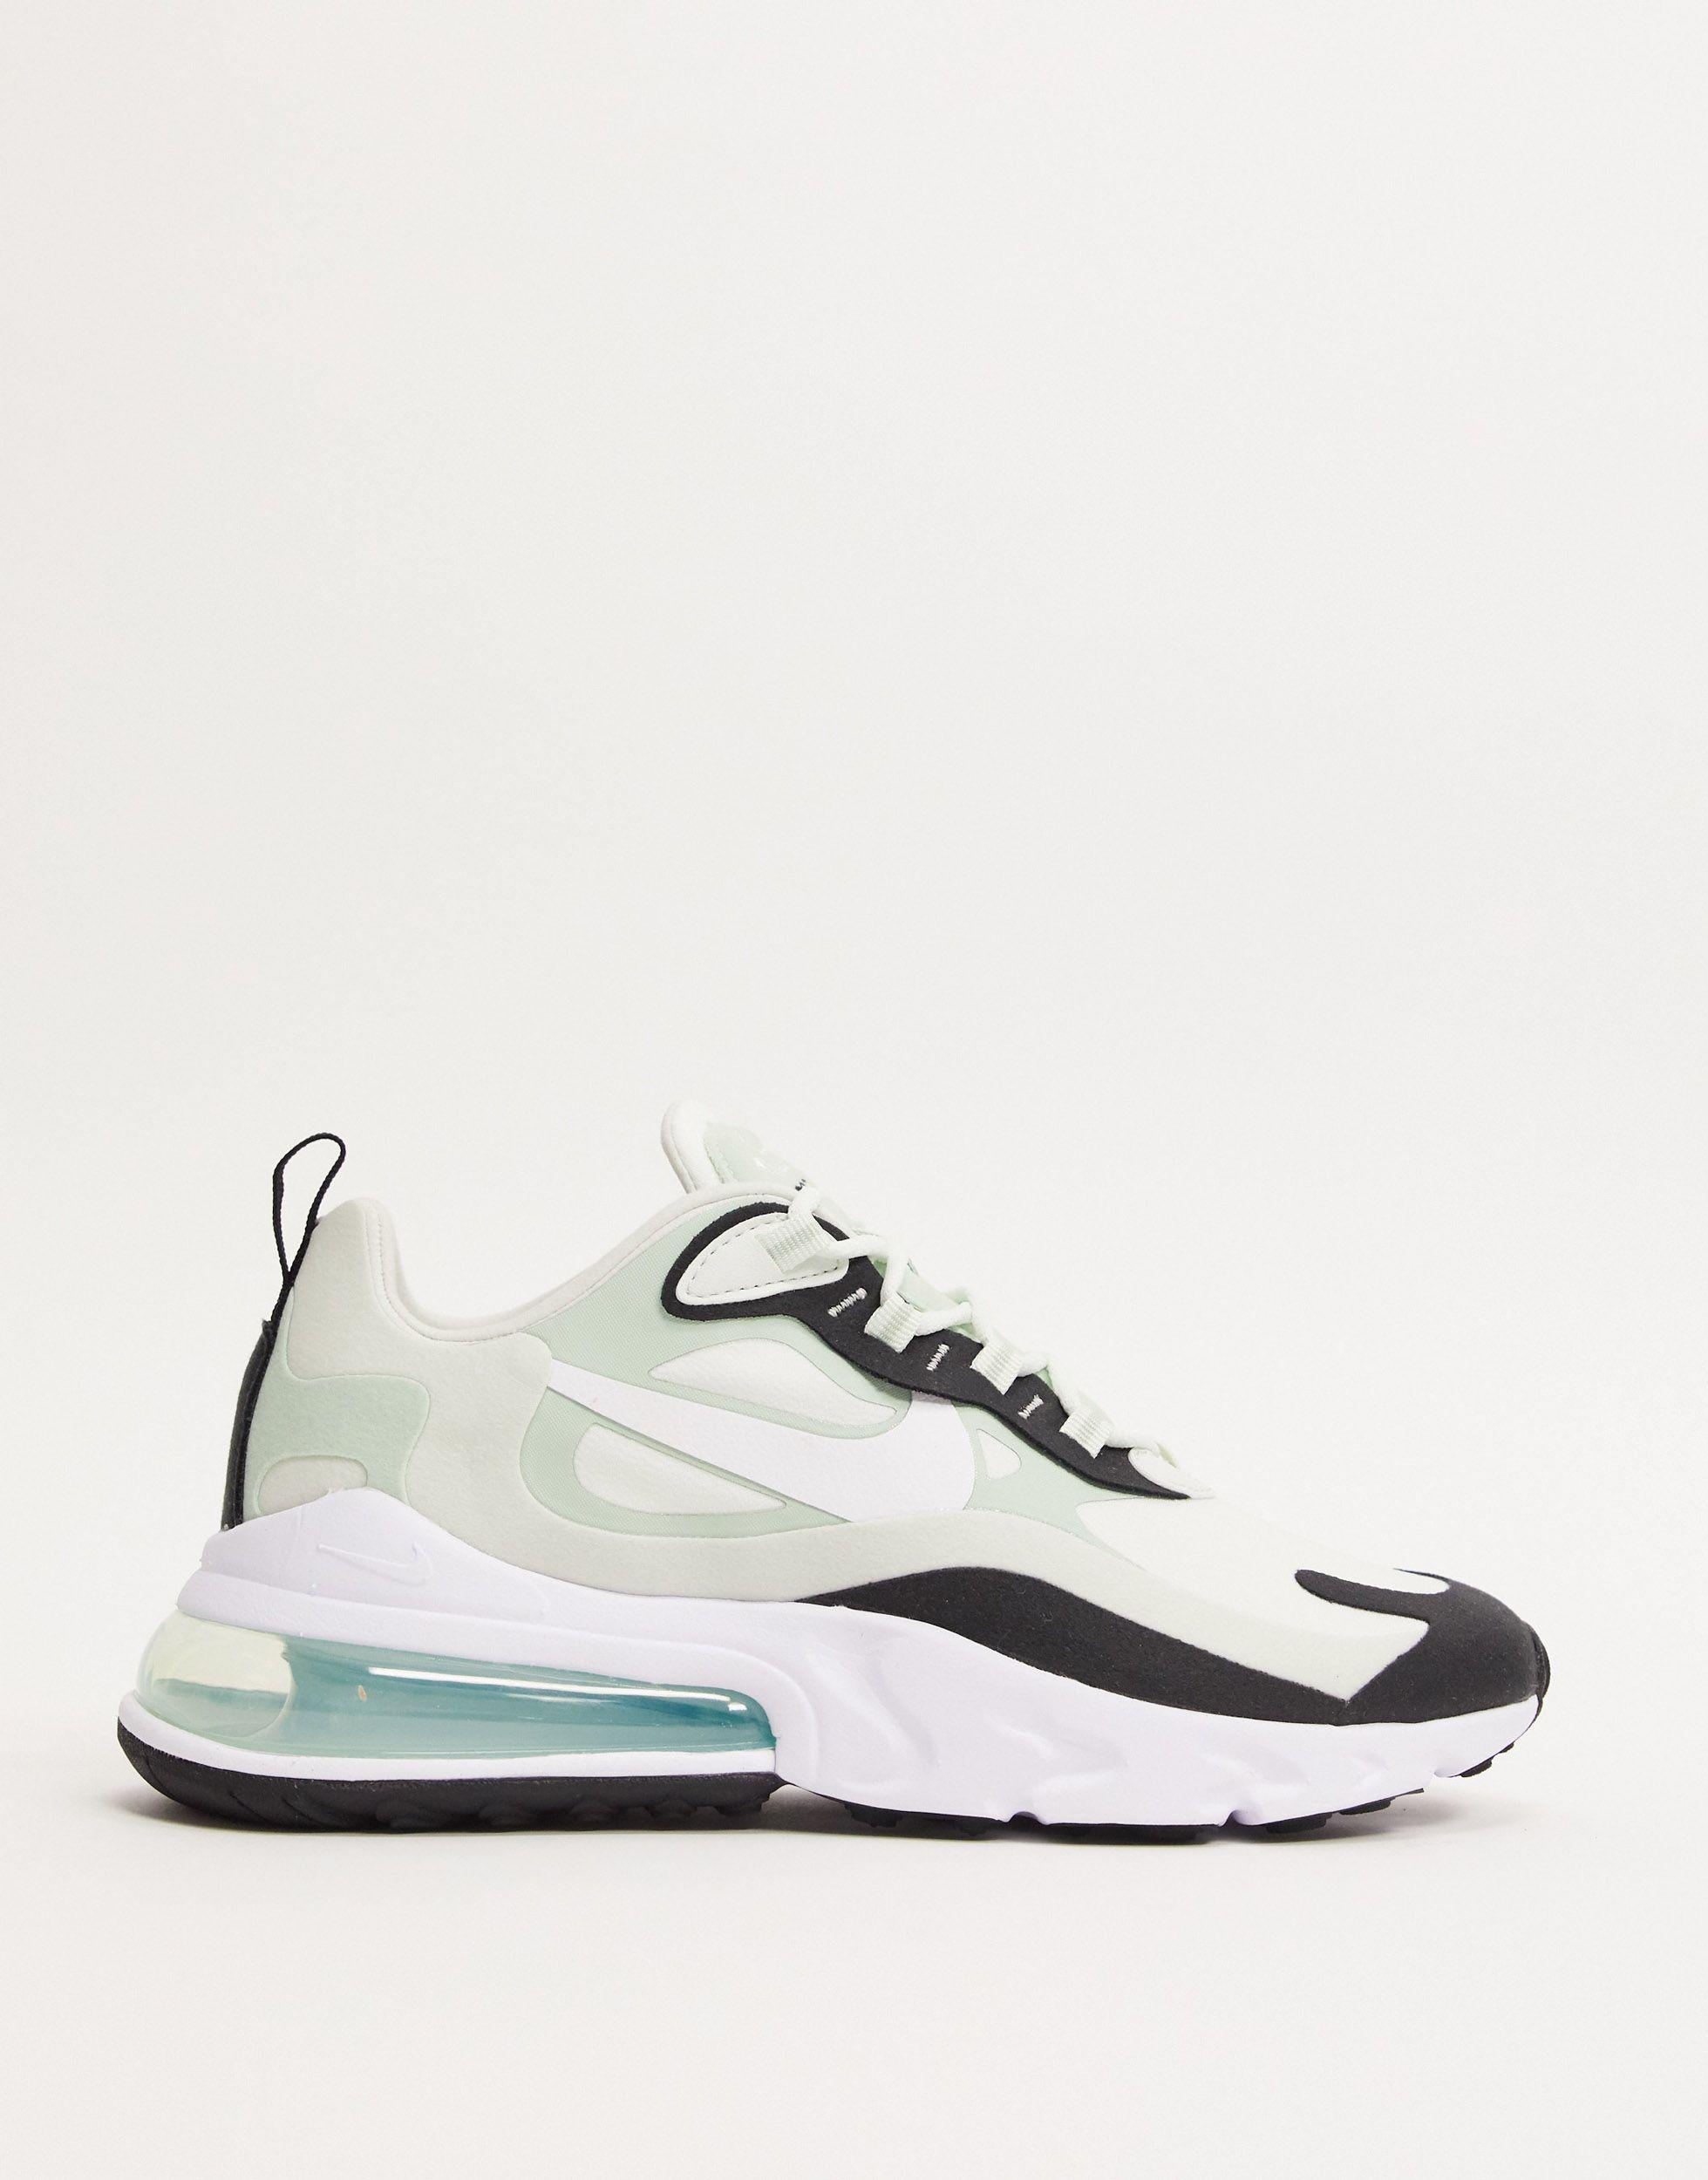 Nike Rubber Air Max 270 React Mint Green Sneakers - Lyst